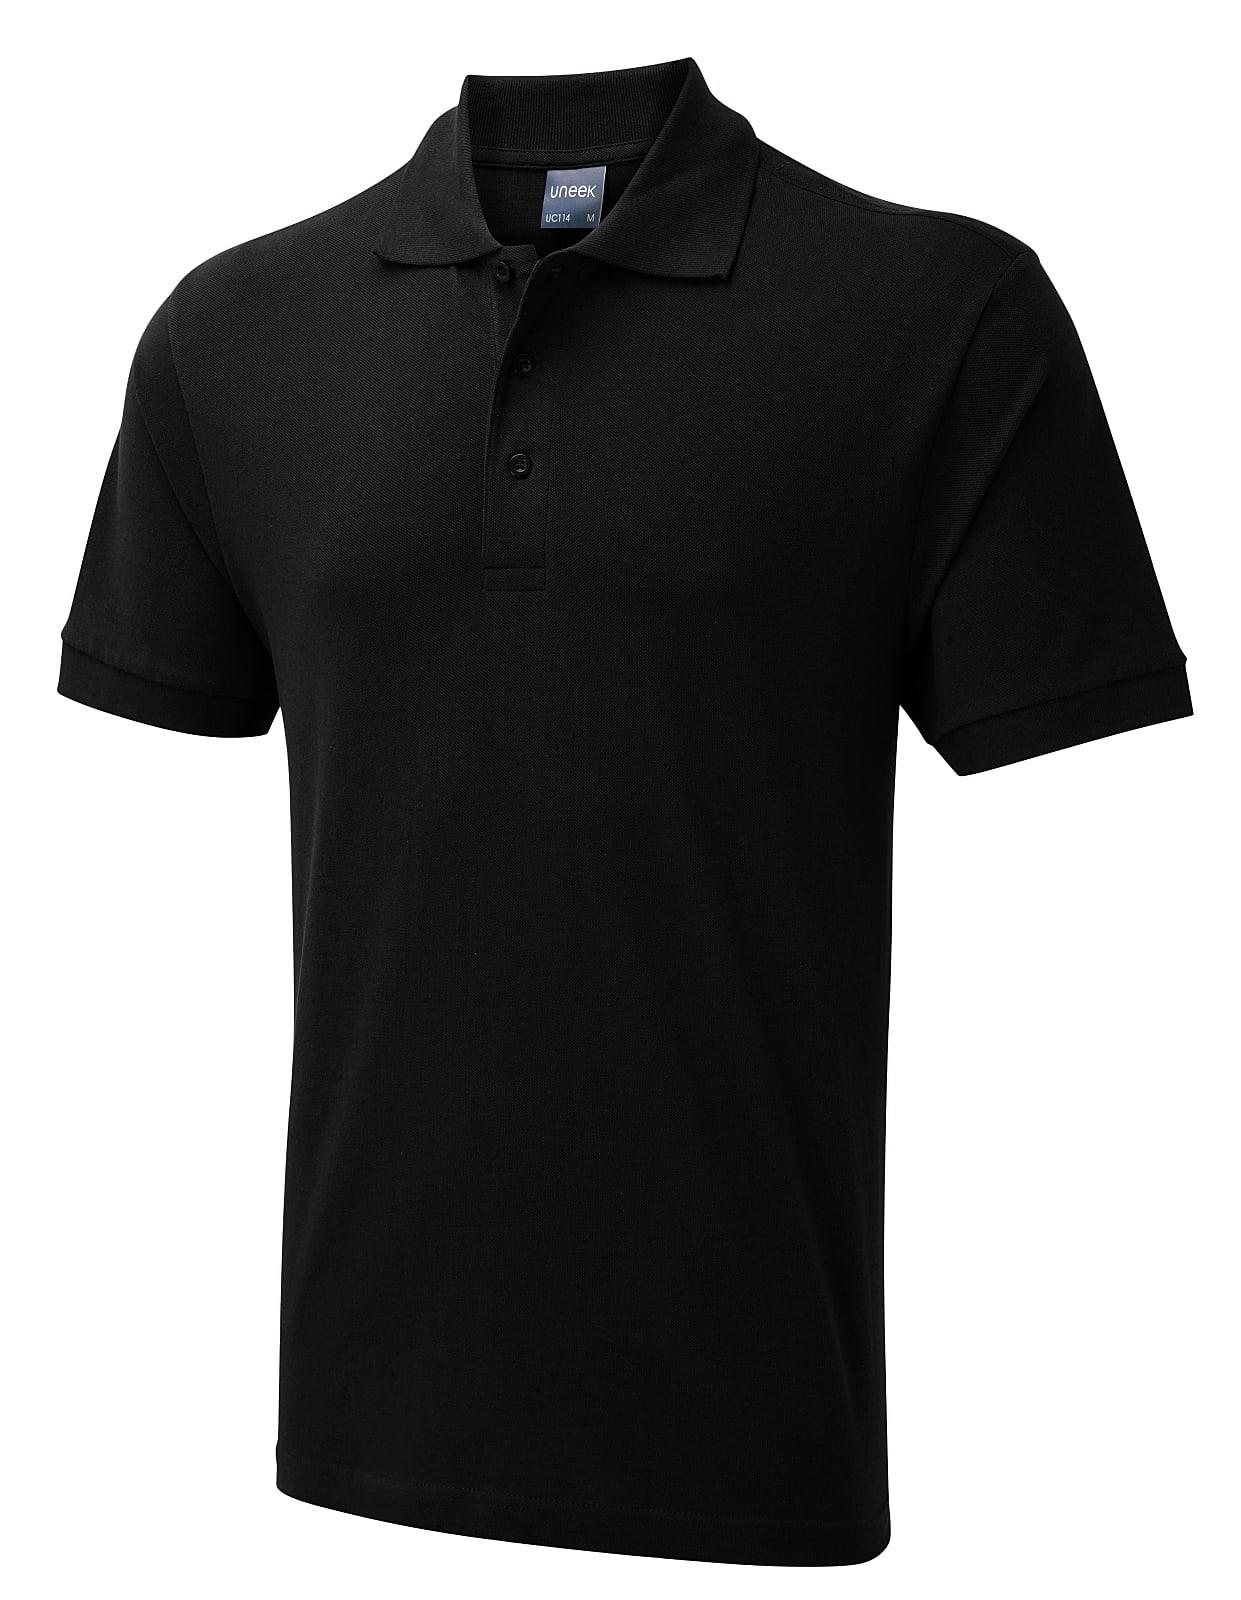 Uneek 180GSM Mens Polo Shirt in Black (Product Code: UC114)